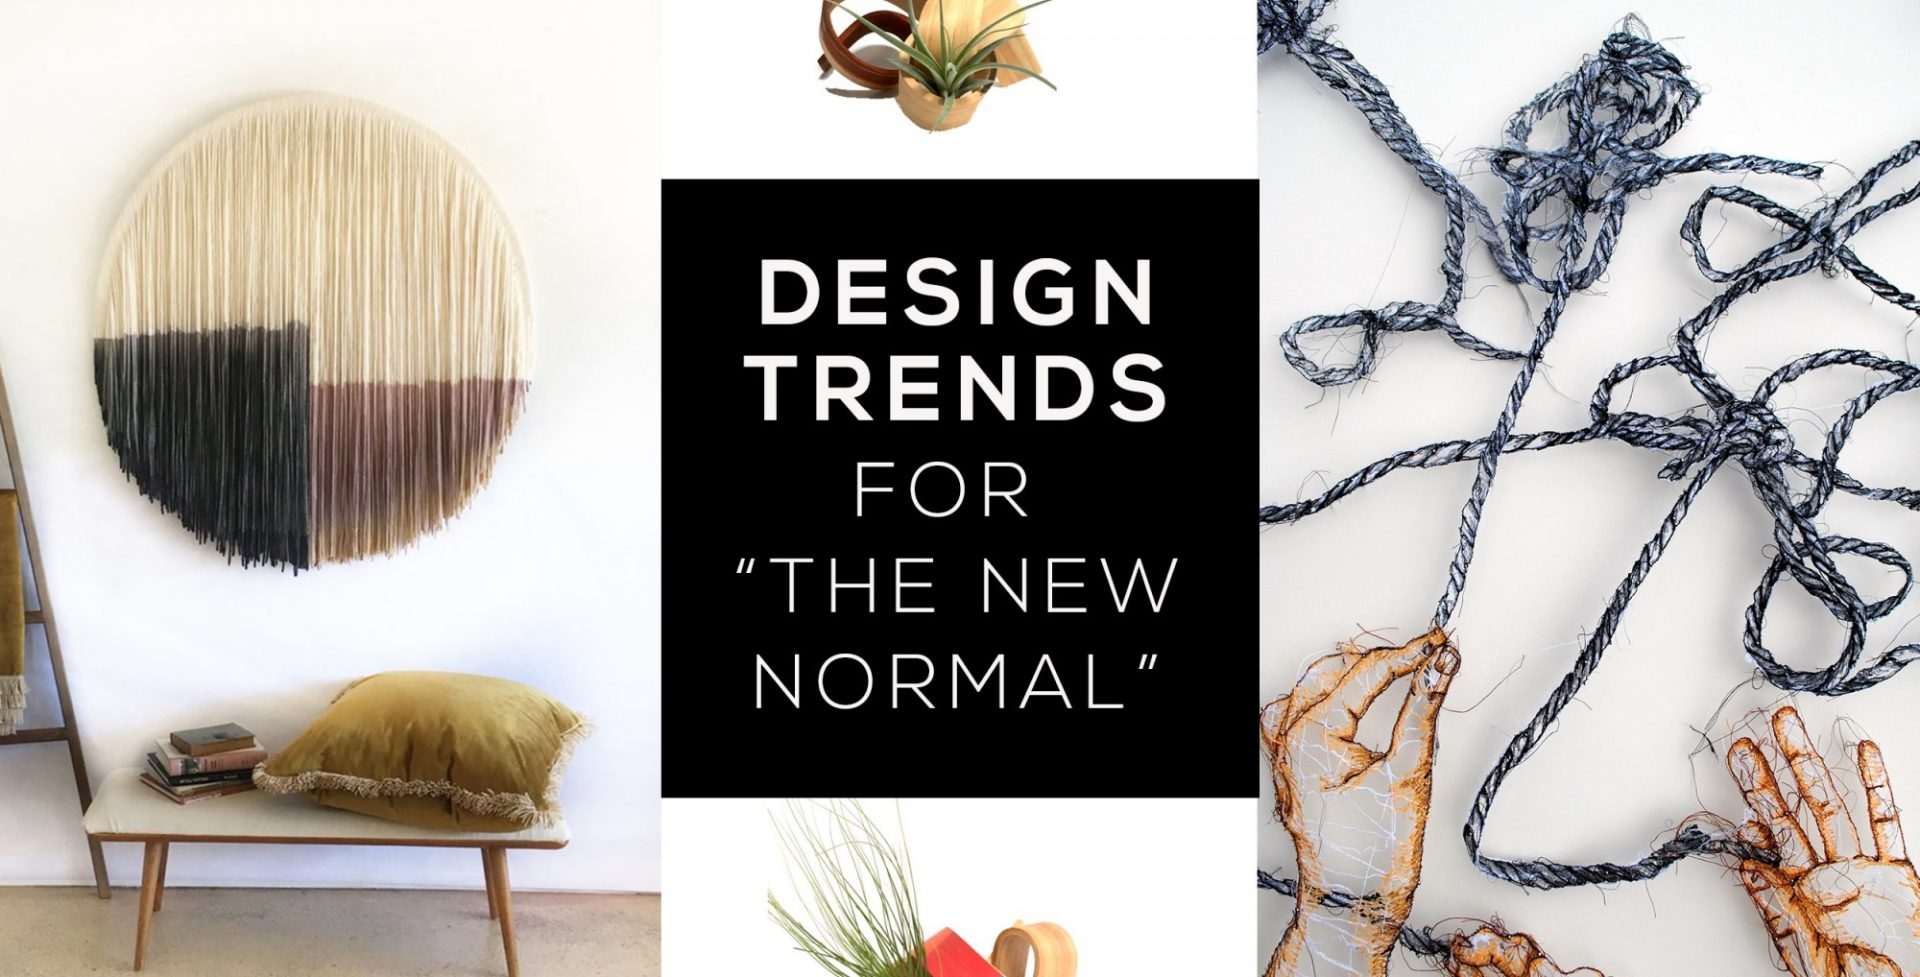 Interior Design Trends for “The New Normal”